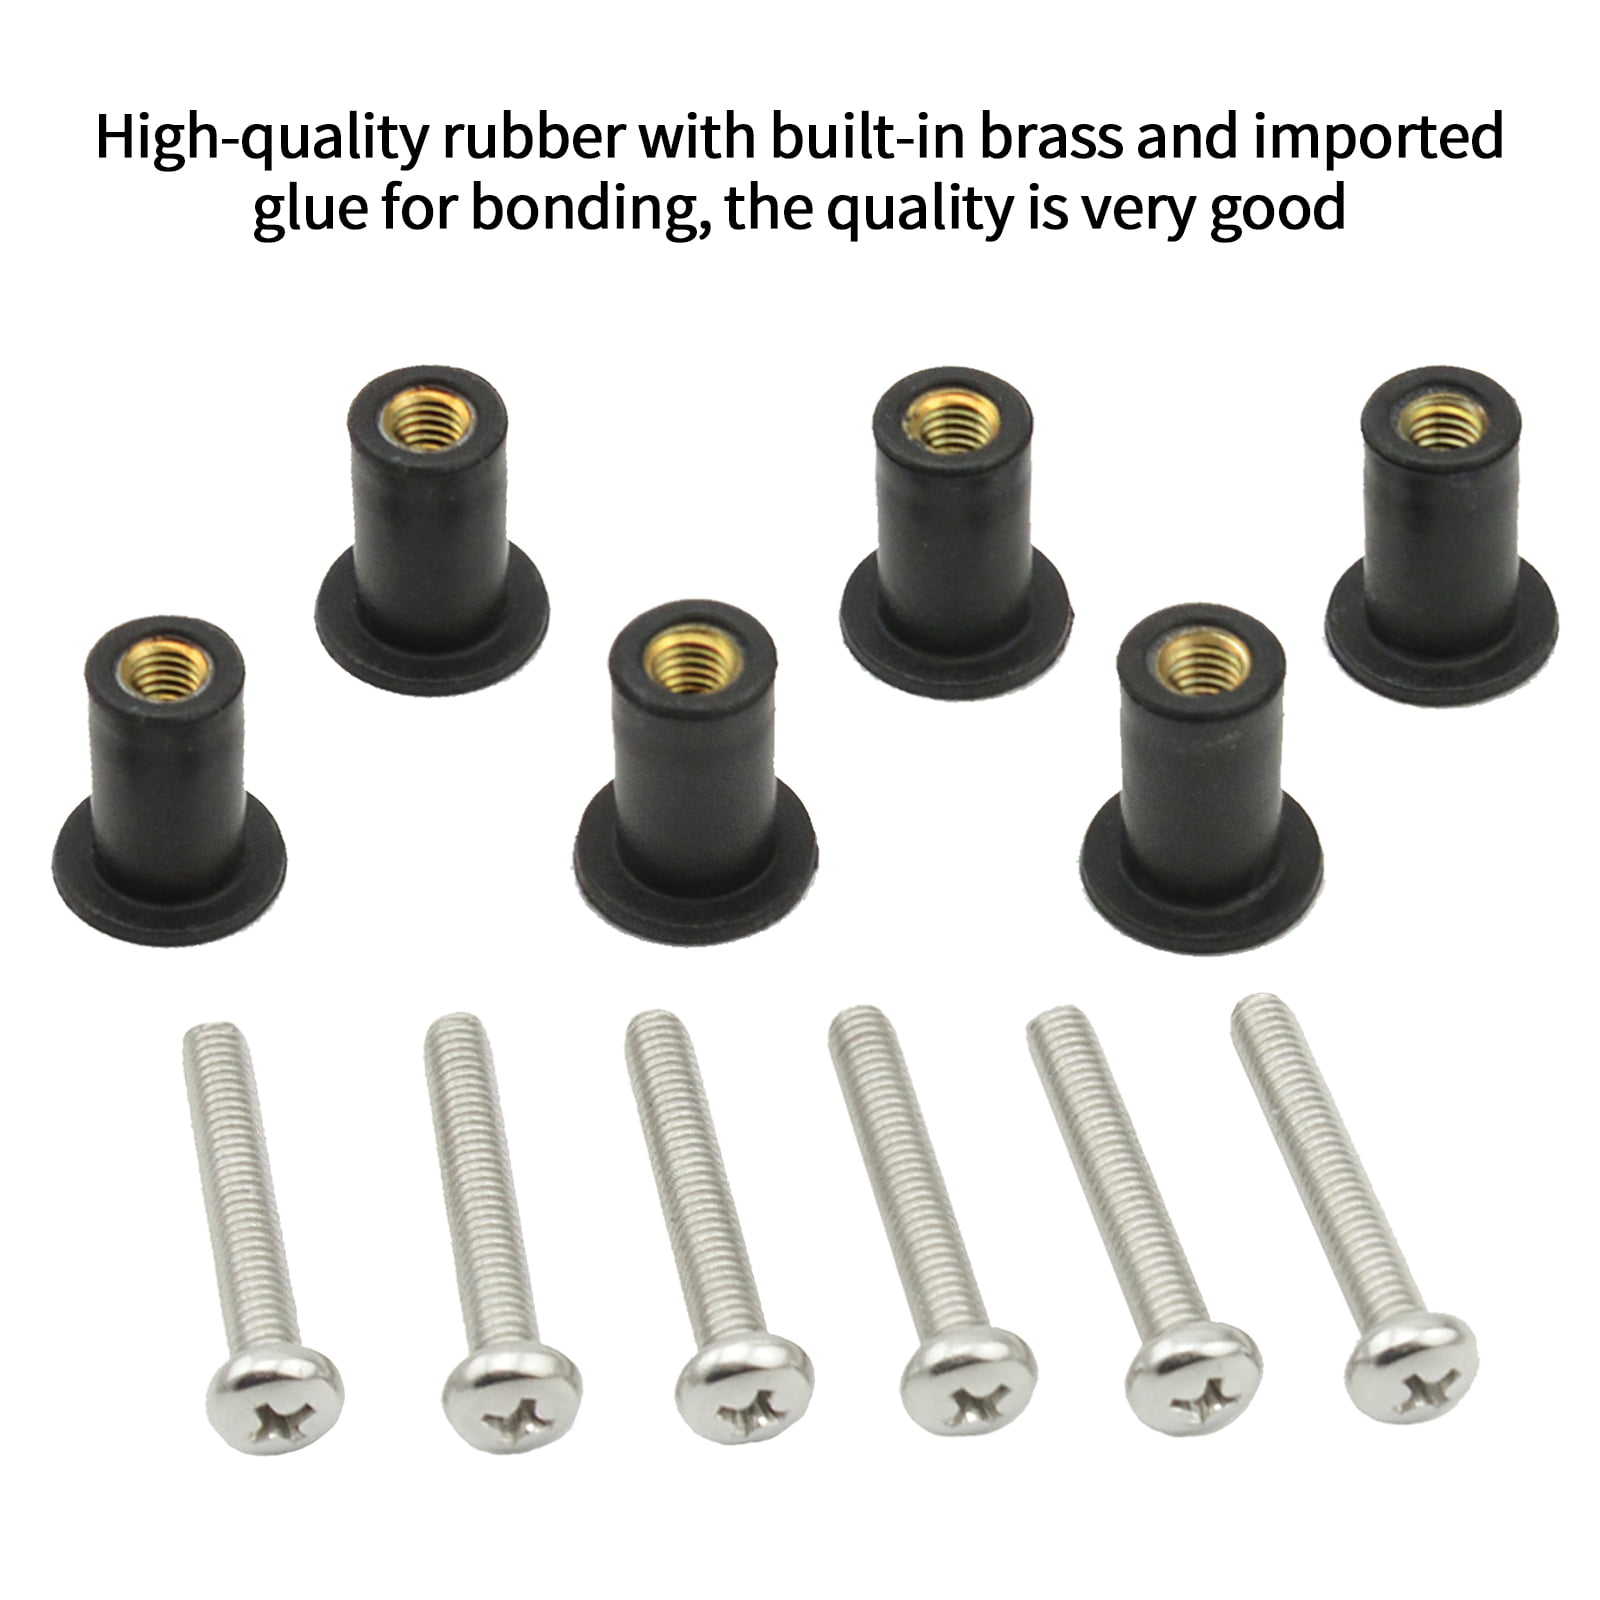 Boat Marine Stainless Steel Hardware Fastener Kit Screws Bolts Nuts Washers 